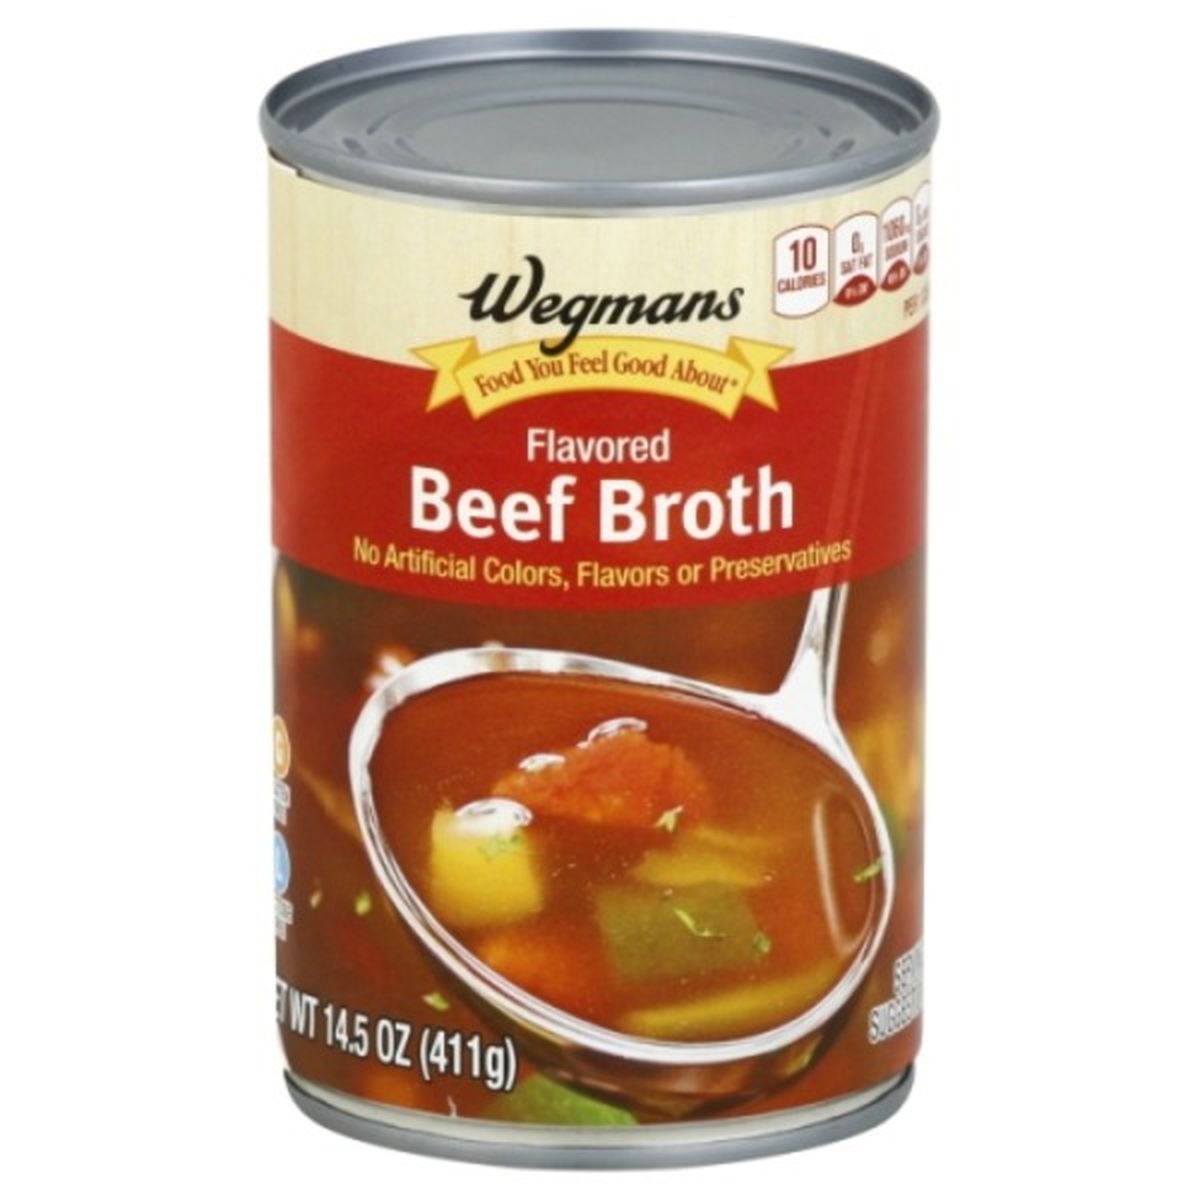 Calories in Wegmans Canned Beef Broth